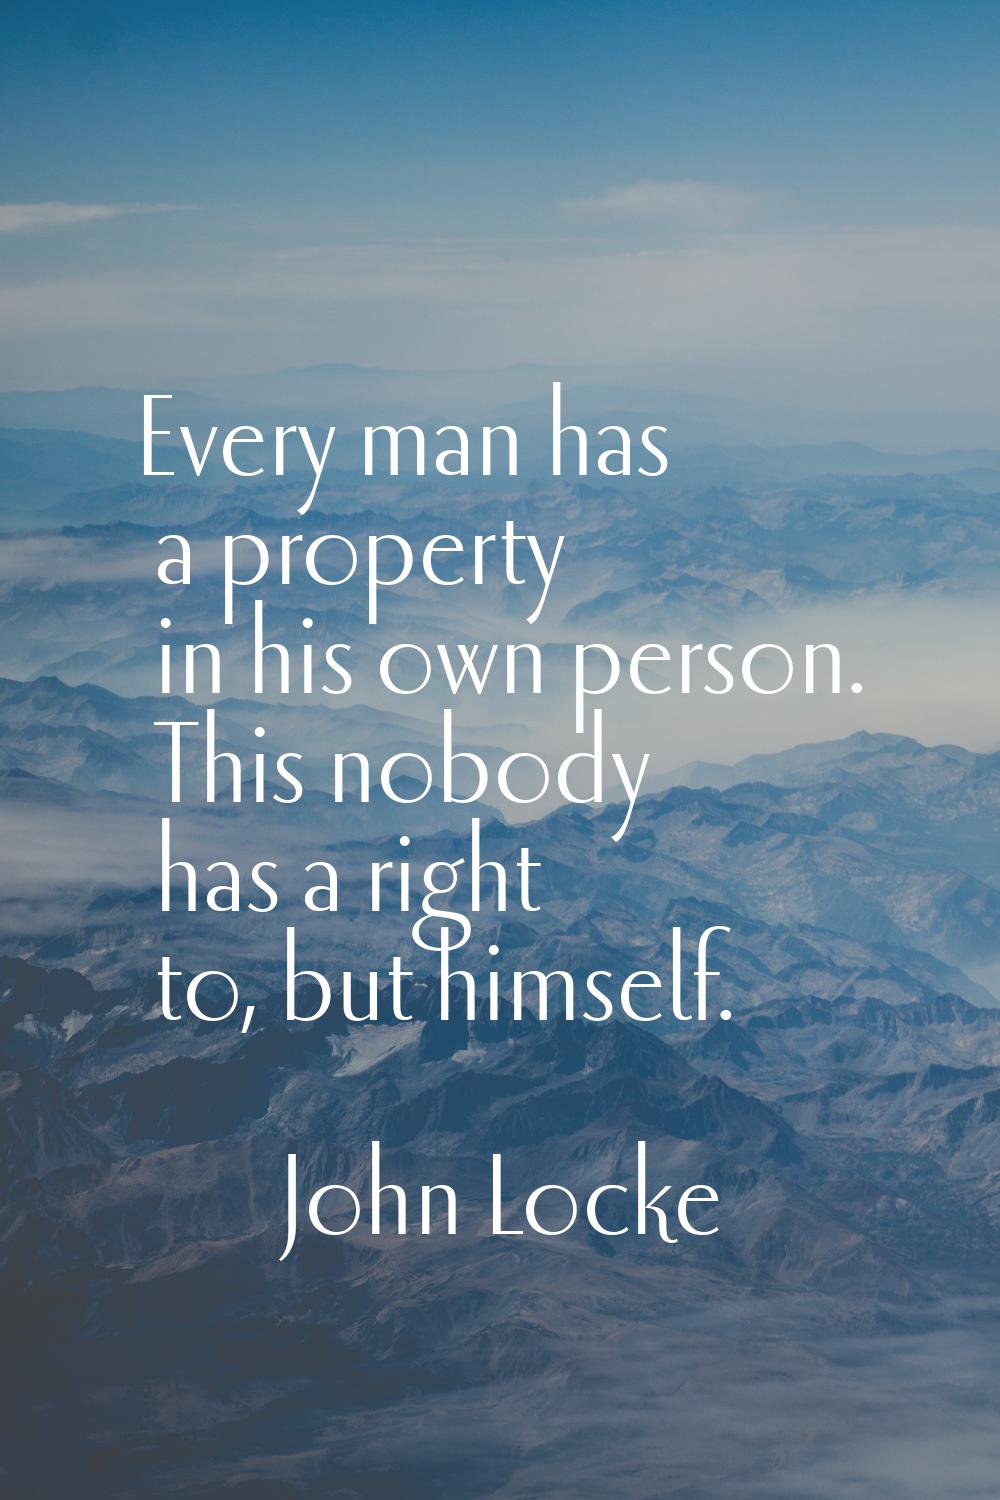 Every man has a property in his own person. This nobody has a right to, but himself.